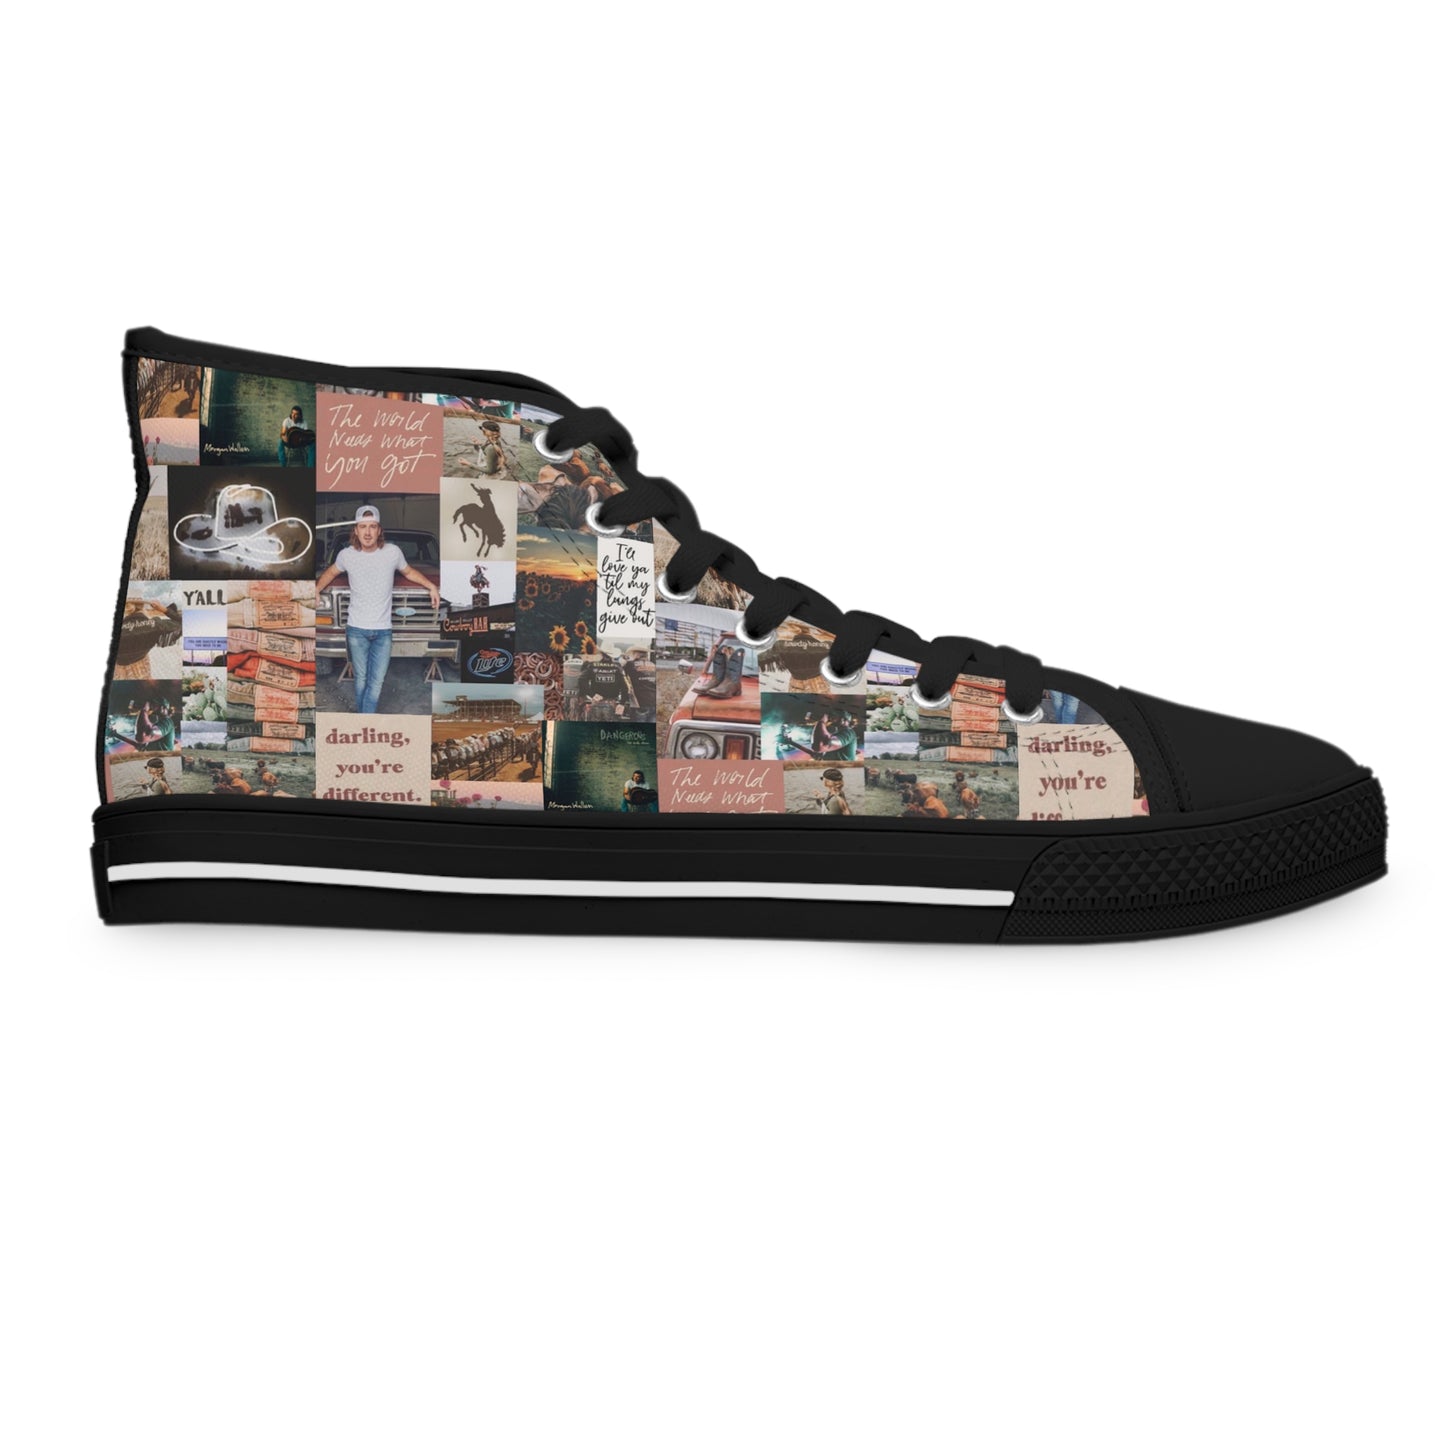 Morgan Wallen Darling You're Different Collage Women's High Top Sneakers